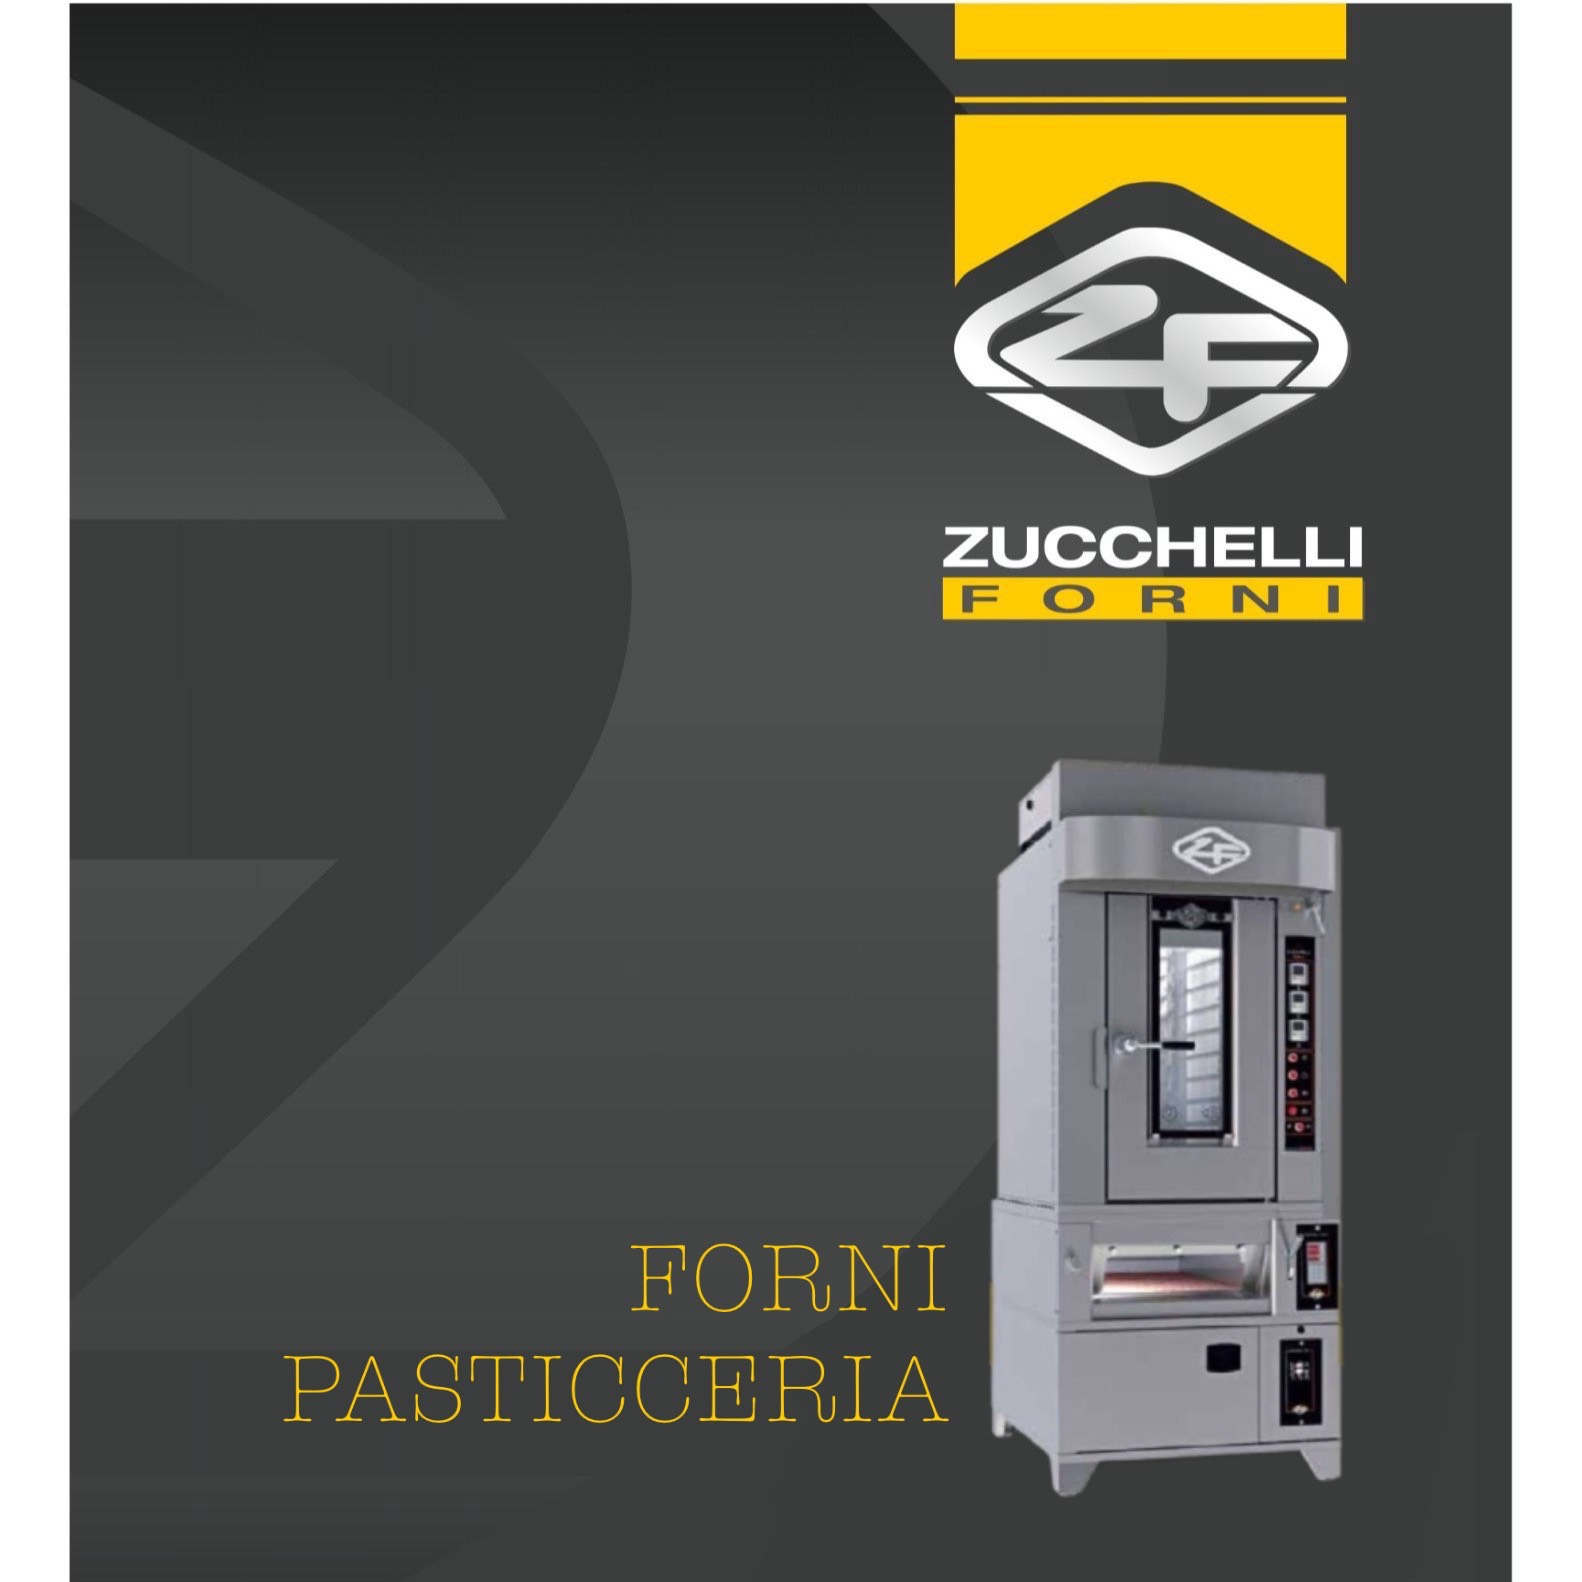 Zucchelli Rotary Pastry Ovens Brochure